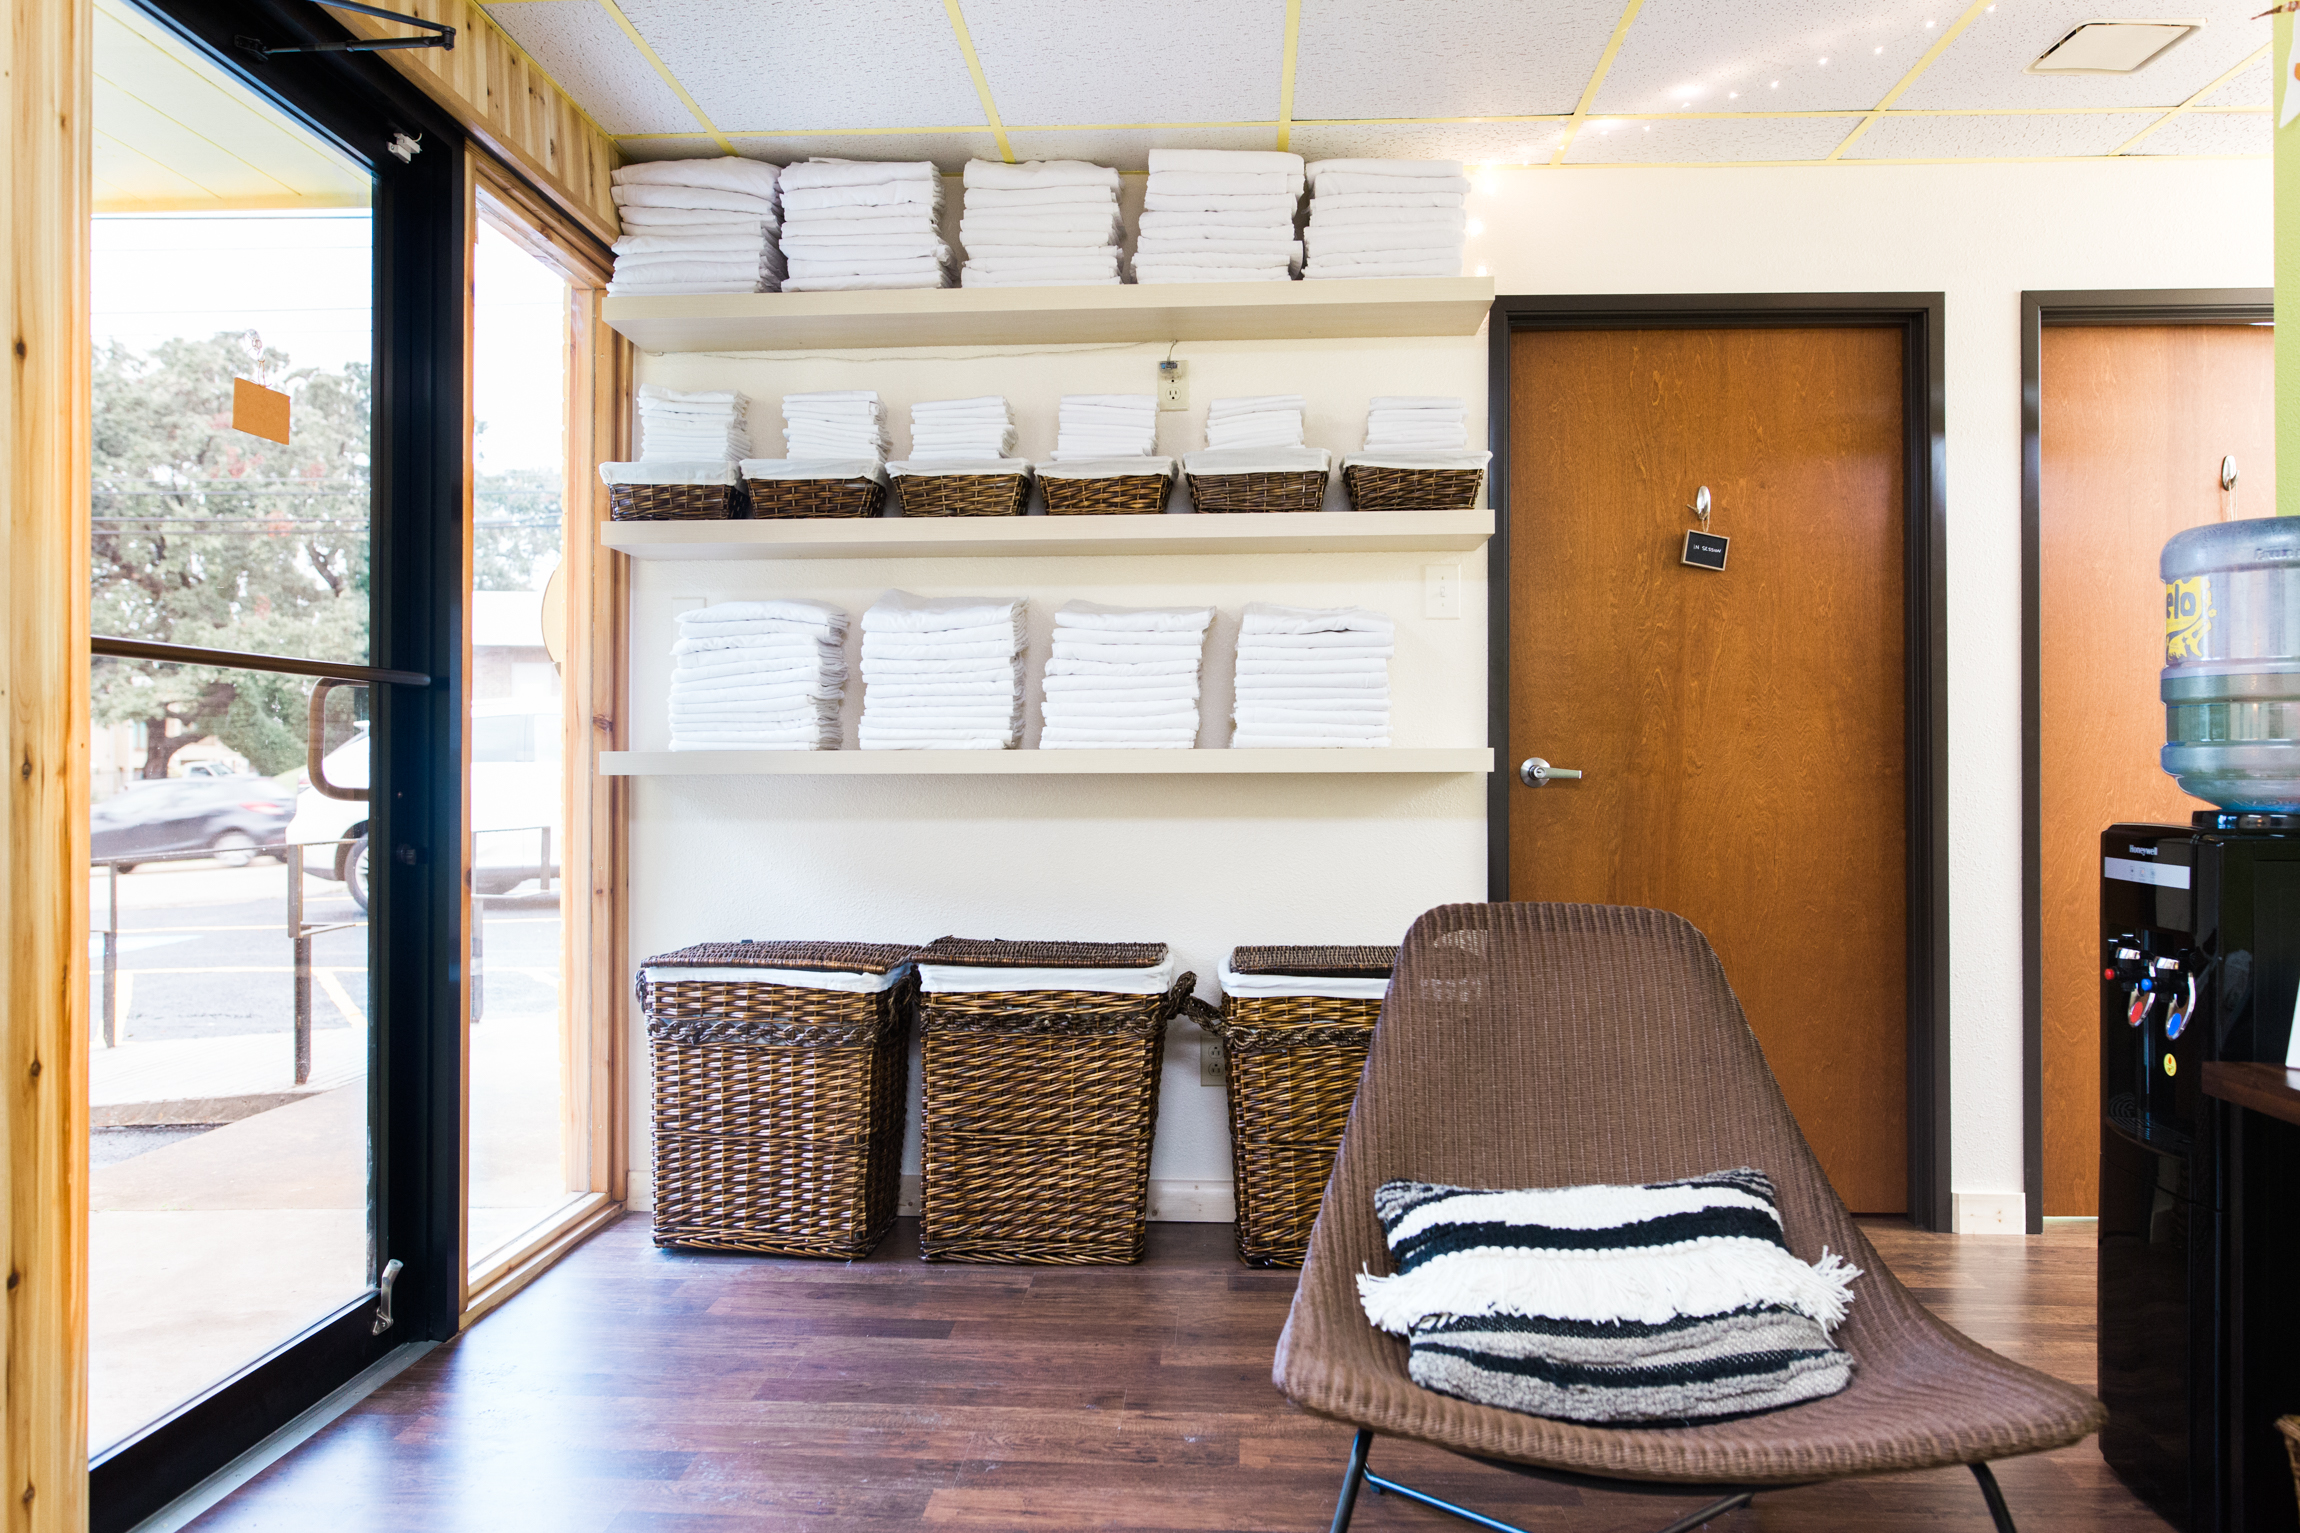  Image featuring the waiting area at Mantis Massage Therapy Studio in Austin, Texas. Captured in this invited image is freshly laundered linens and towels, neatly stacked on a shelf, promising a hygienic and luxurious massage experience. Sunlight str